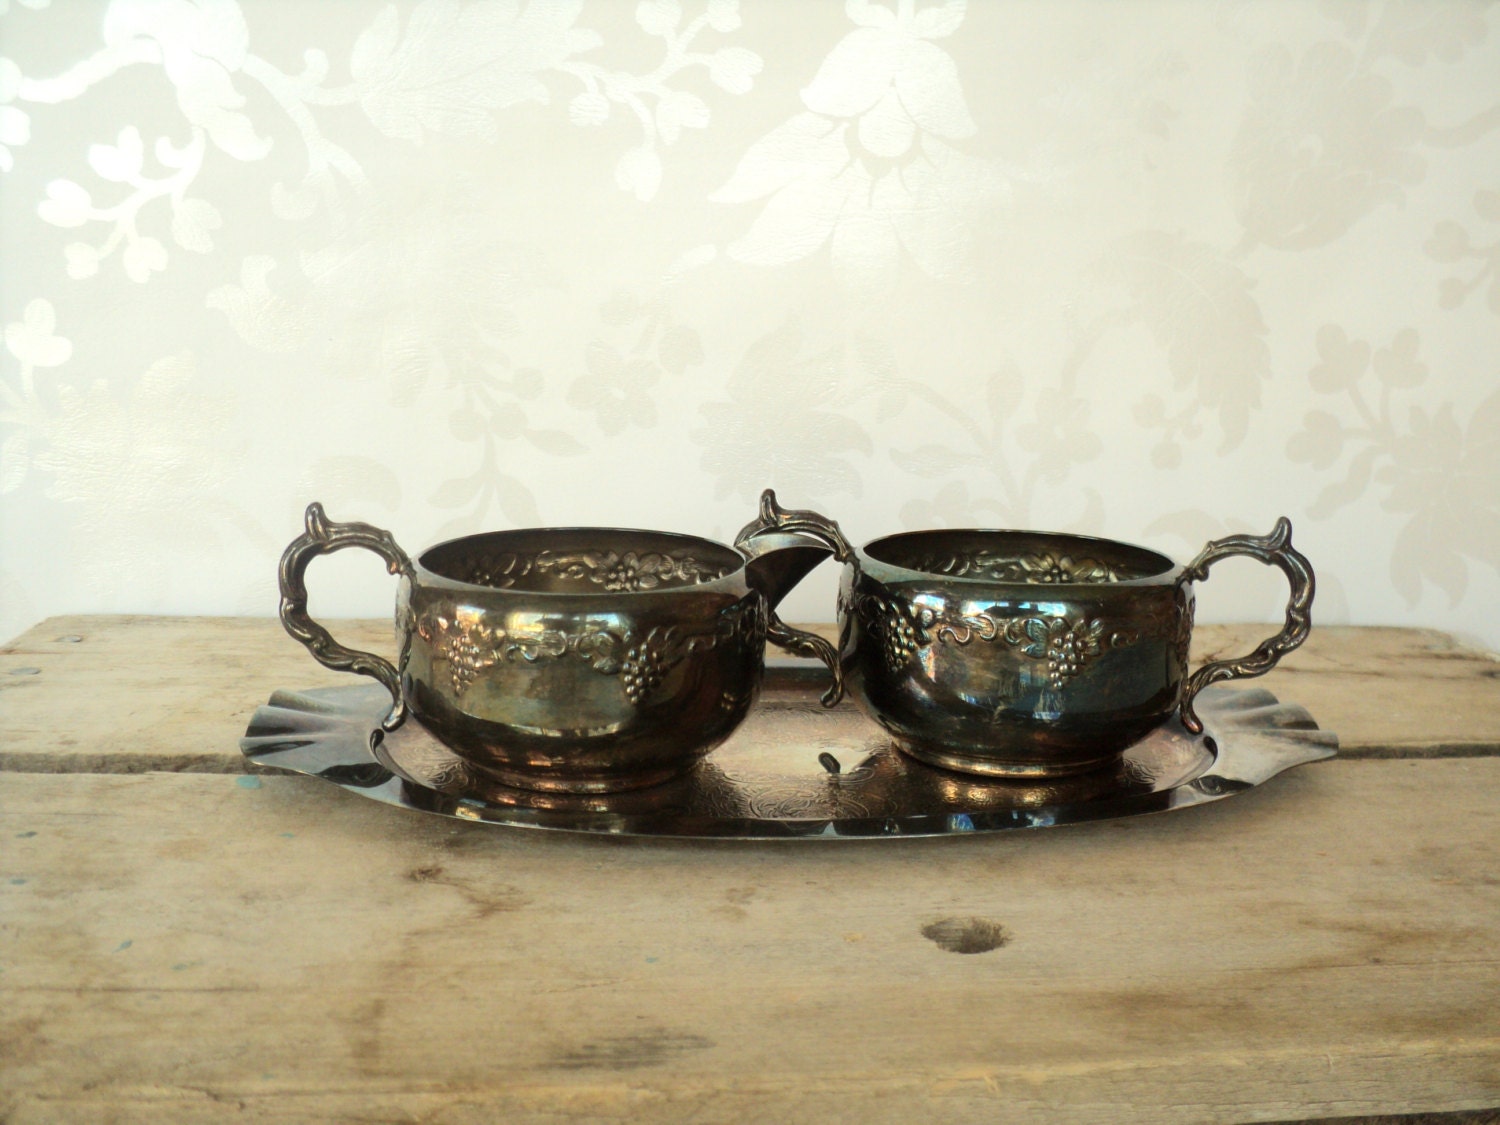 Tarnished Antique Silver Cream And Sugar Bowl With Tray Silverplated